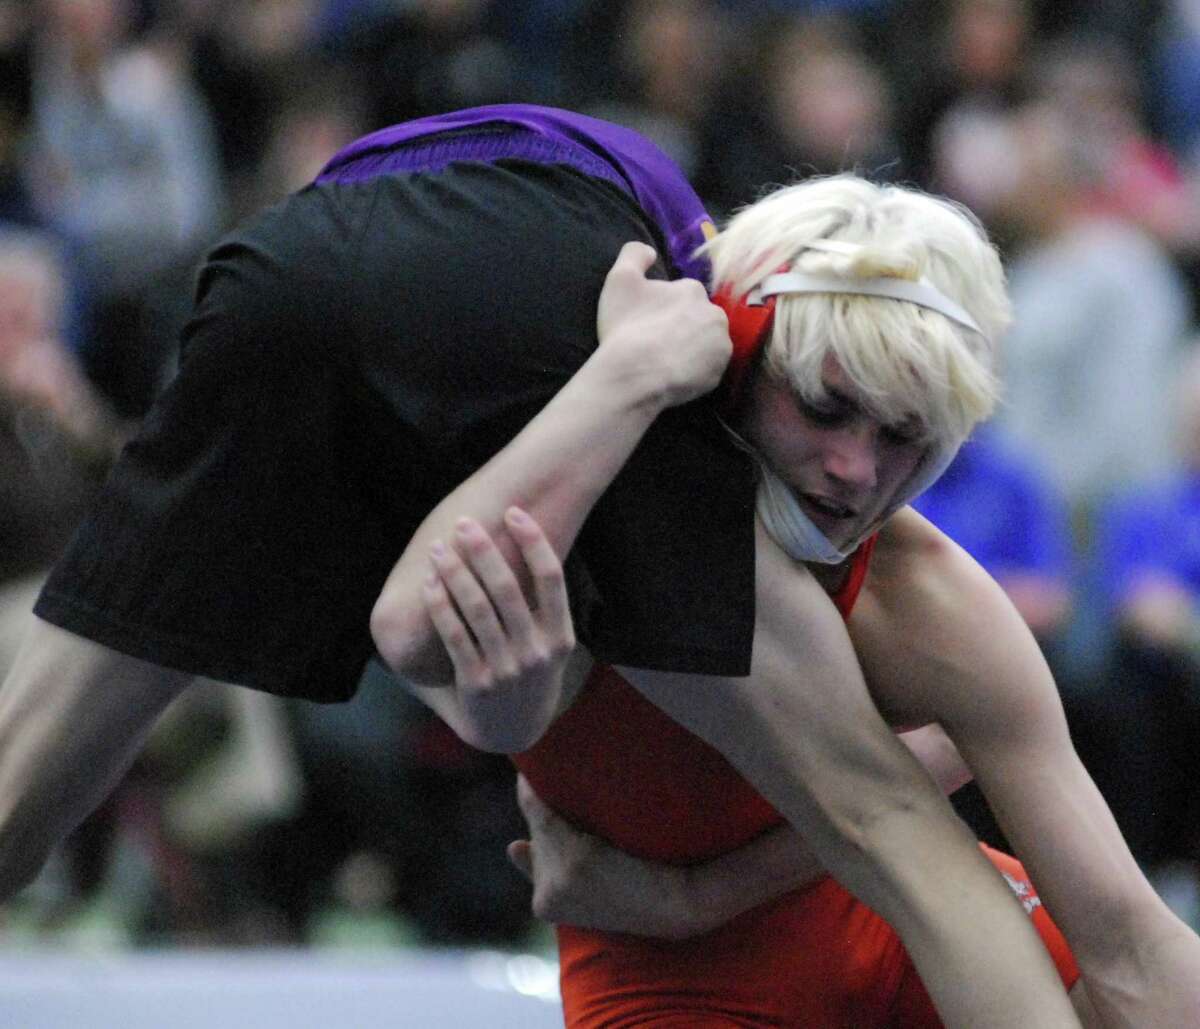 Danbury’s Ryan Jack wrestles Westhill’s Chase Parrot during the finals of the State Open, held Saturday in New Haven.